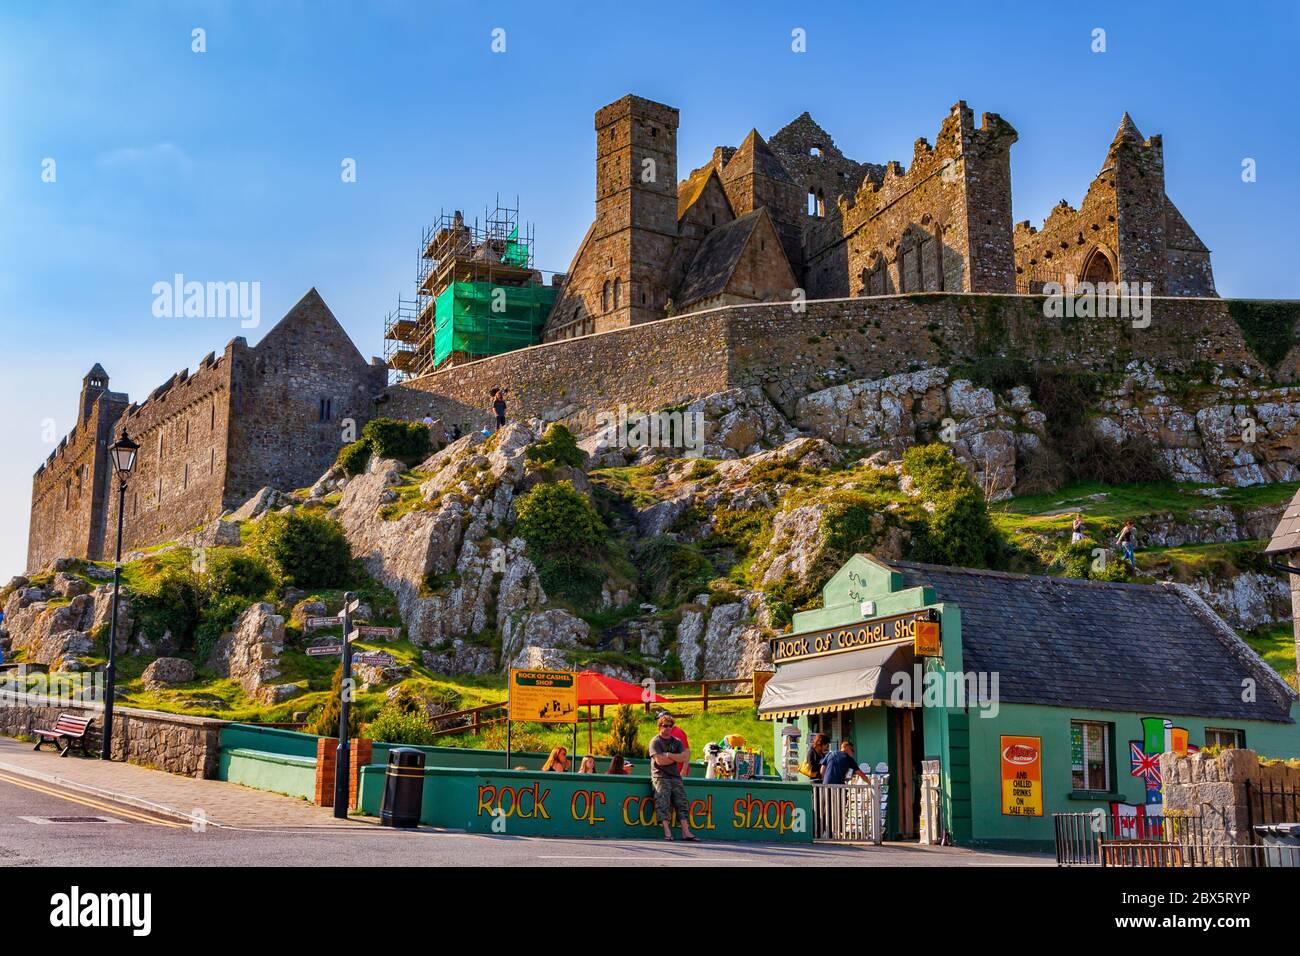 THE 10 BEST Things to Do in Cashel - June 2020 (with 